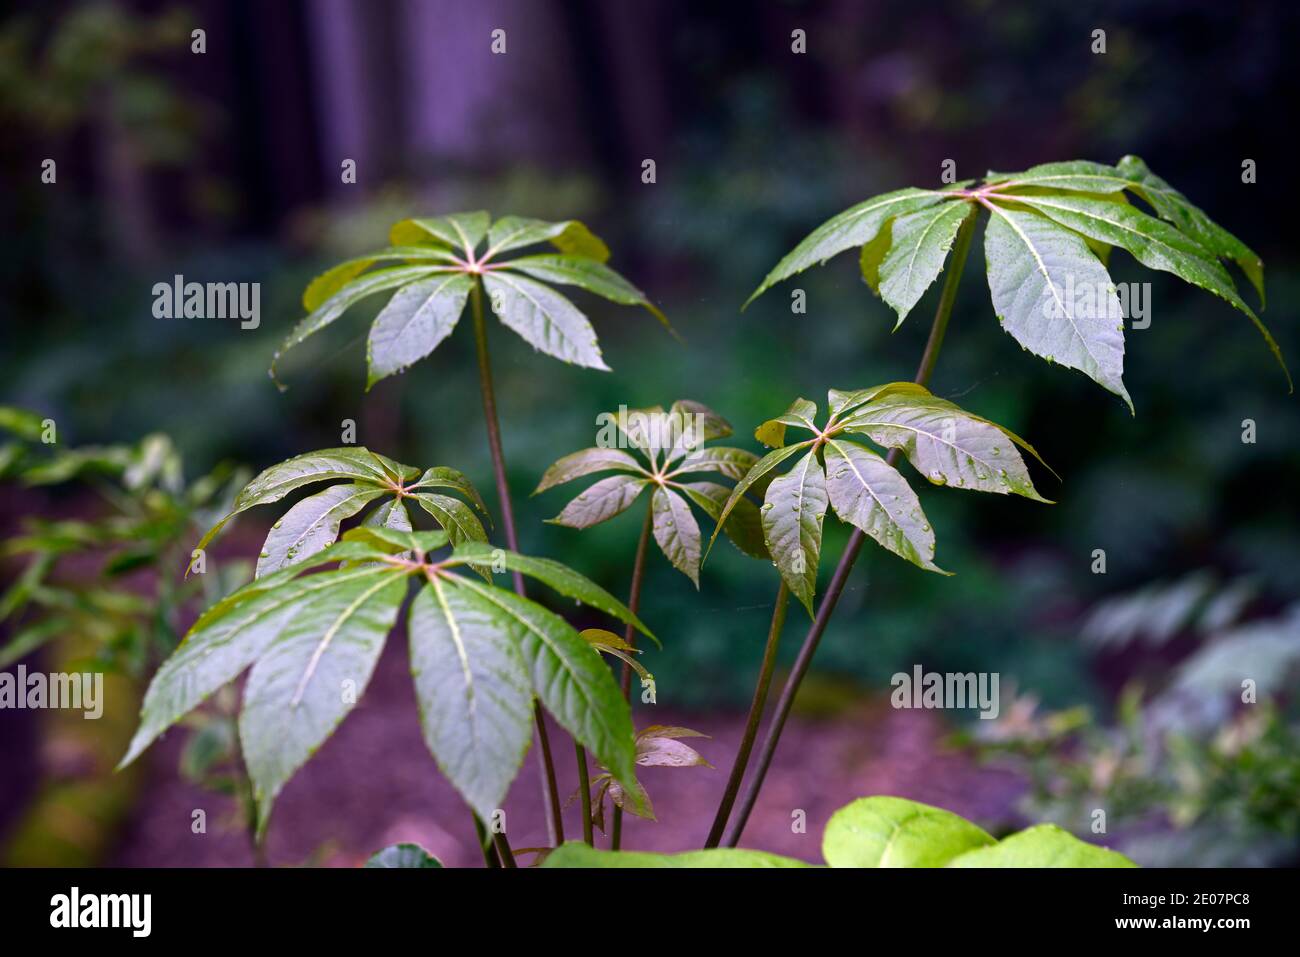 Schefflera shweliensis NJM 13 130,green,leaves,foliage,tropical,exotic,plant,new growth,silver green grey foliage,green grey silver leaves,evergreen f Stock Photo